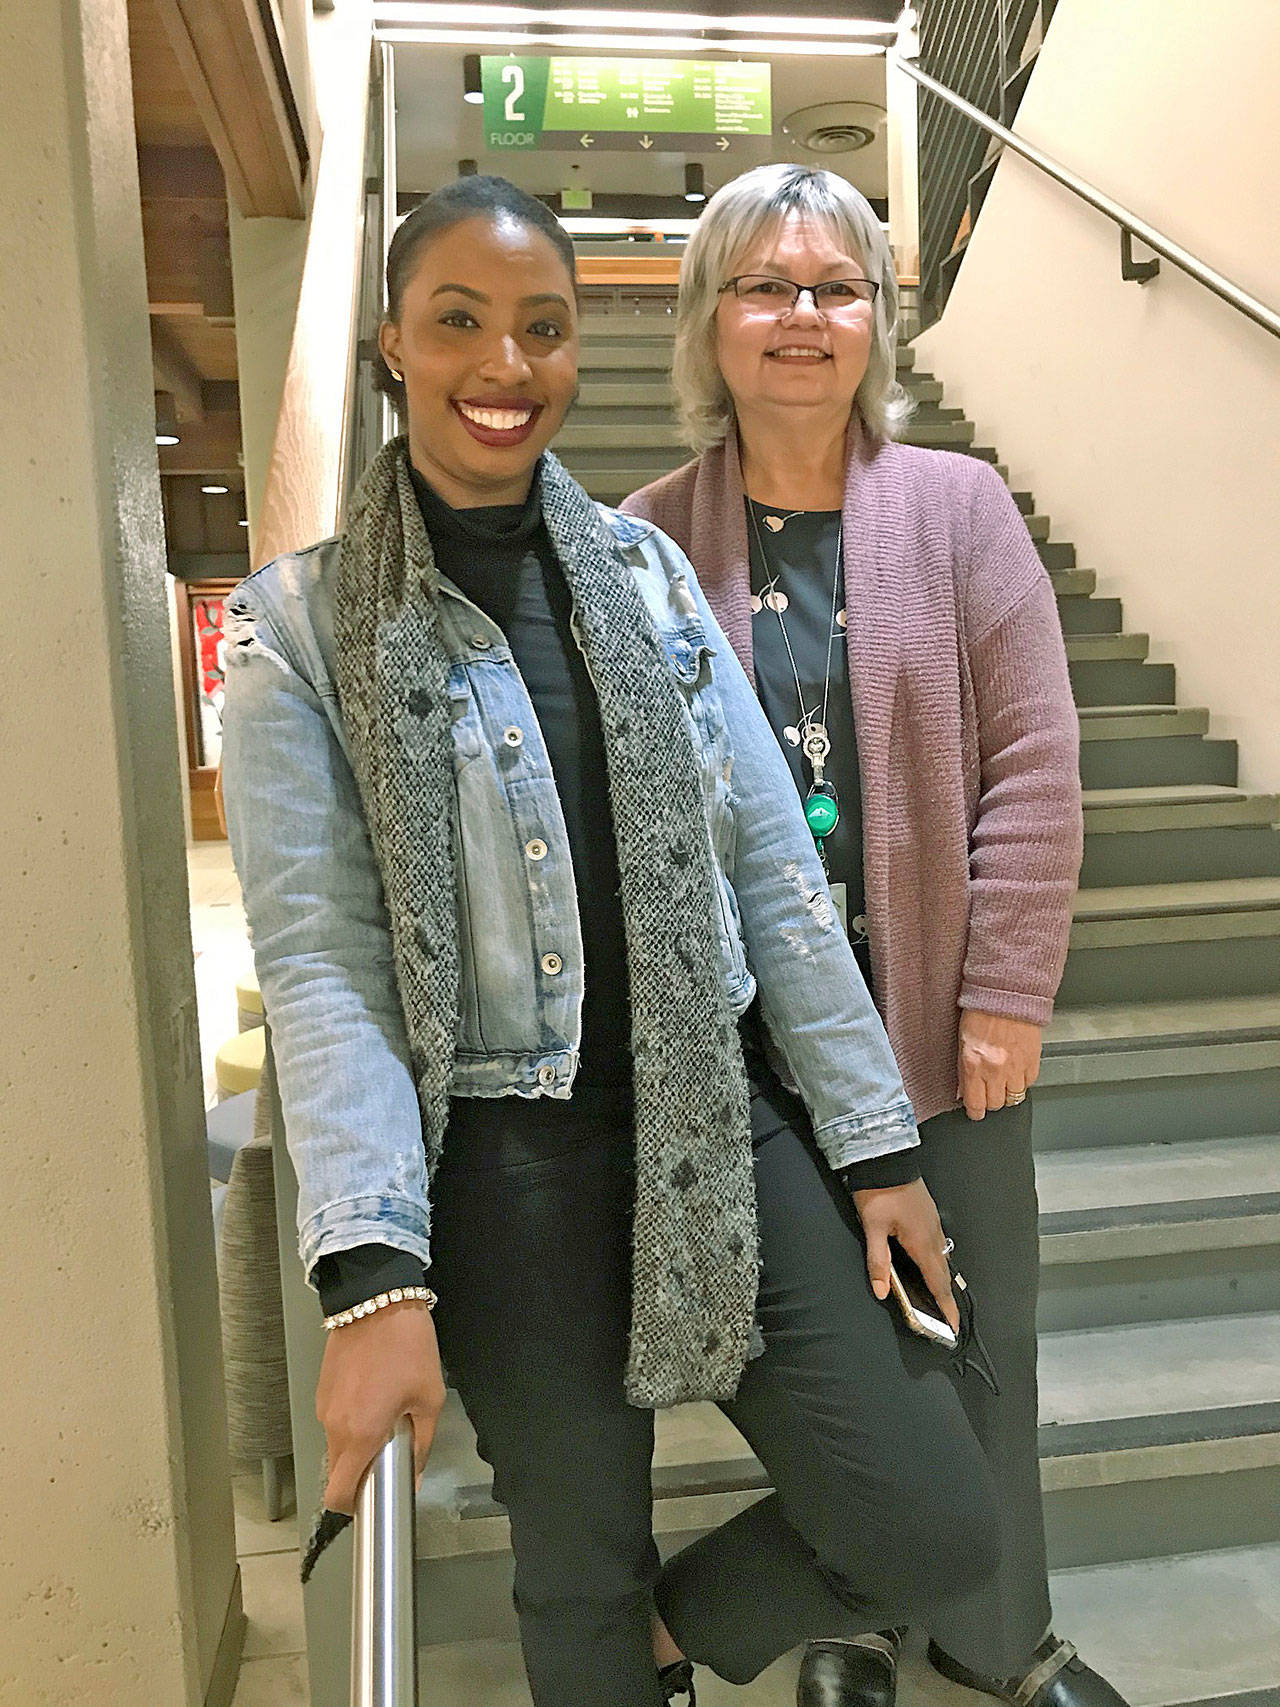 Basha Alexander, progress and completion advisor in the Career & Advising Center at Green River College, left, and Diana Holz, director of early childhood education at the school, are helping student-parents navigate their education with helpful resources. MARK KLAAS, Auburn Reporter